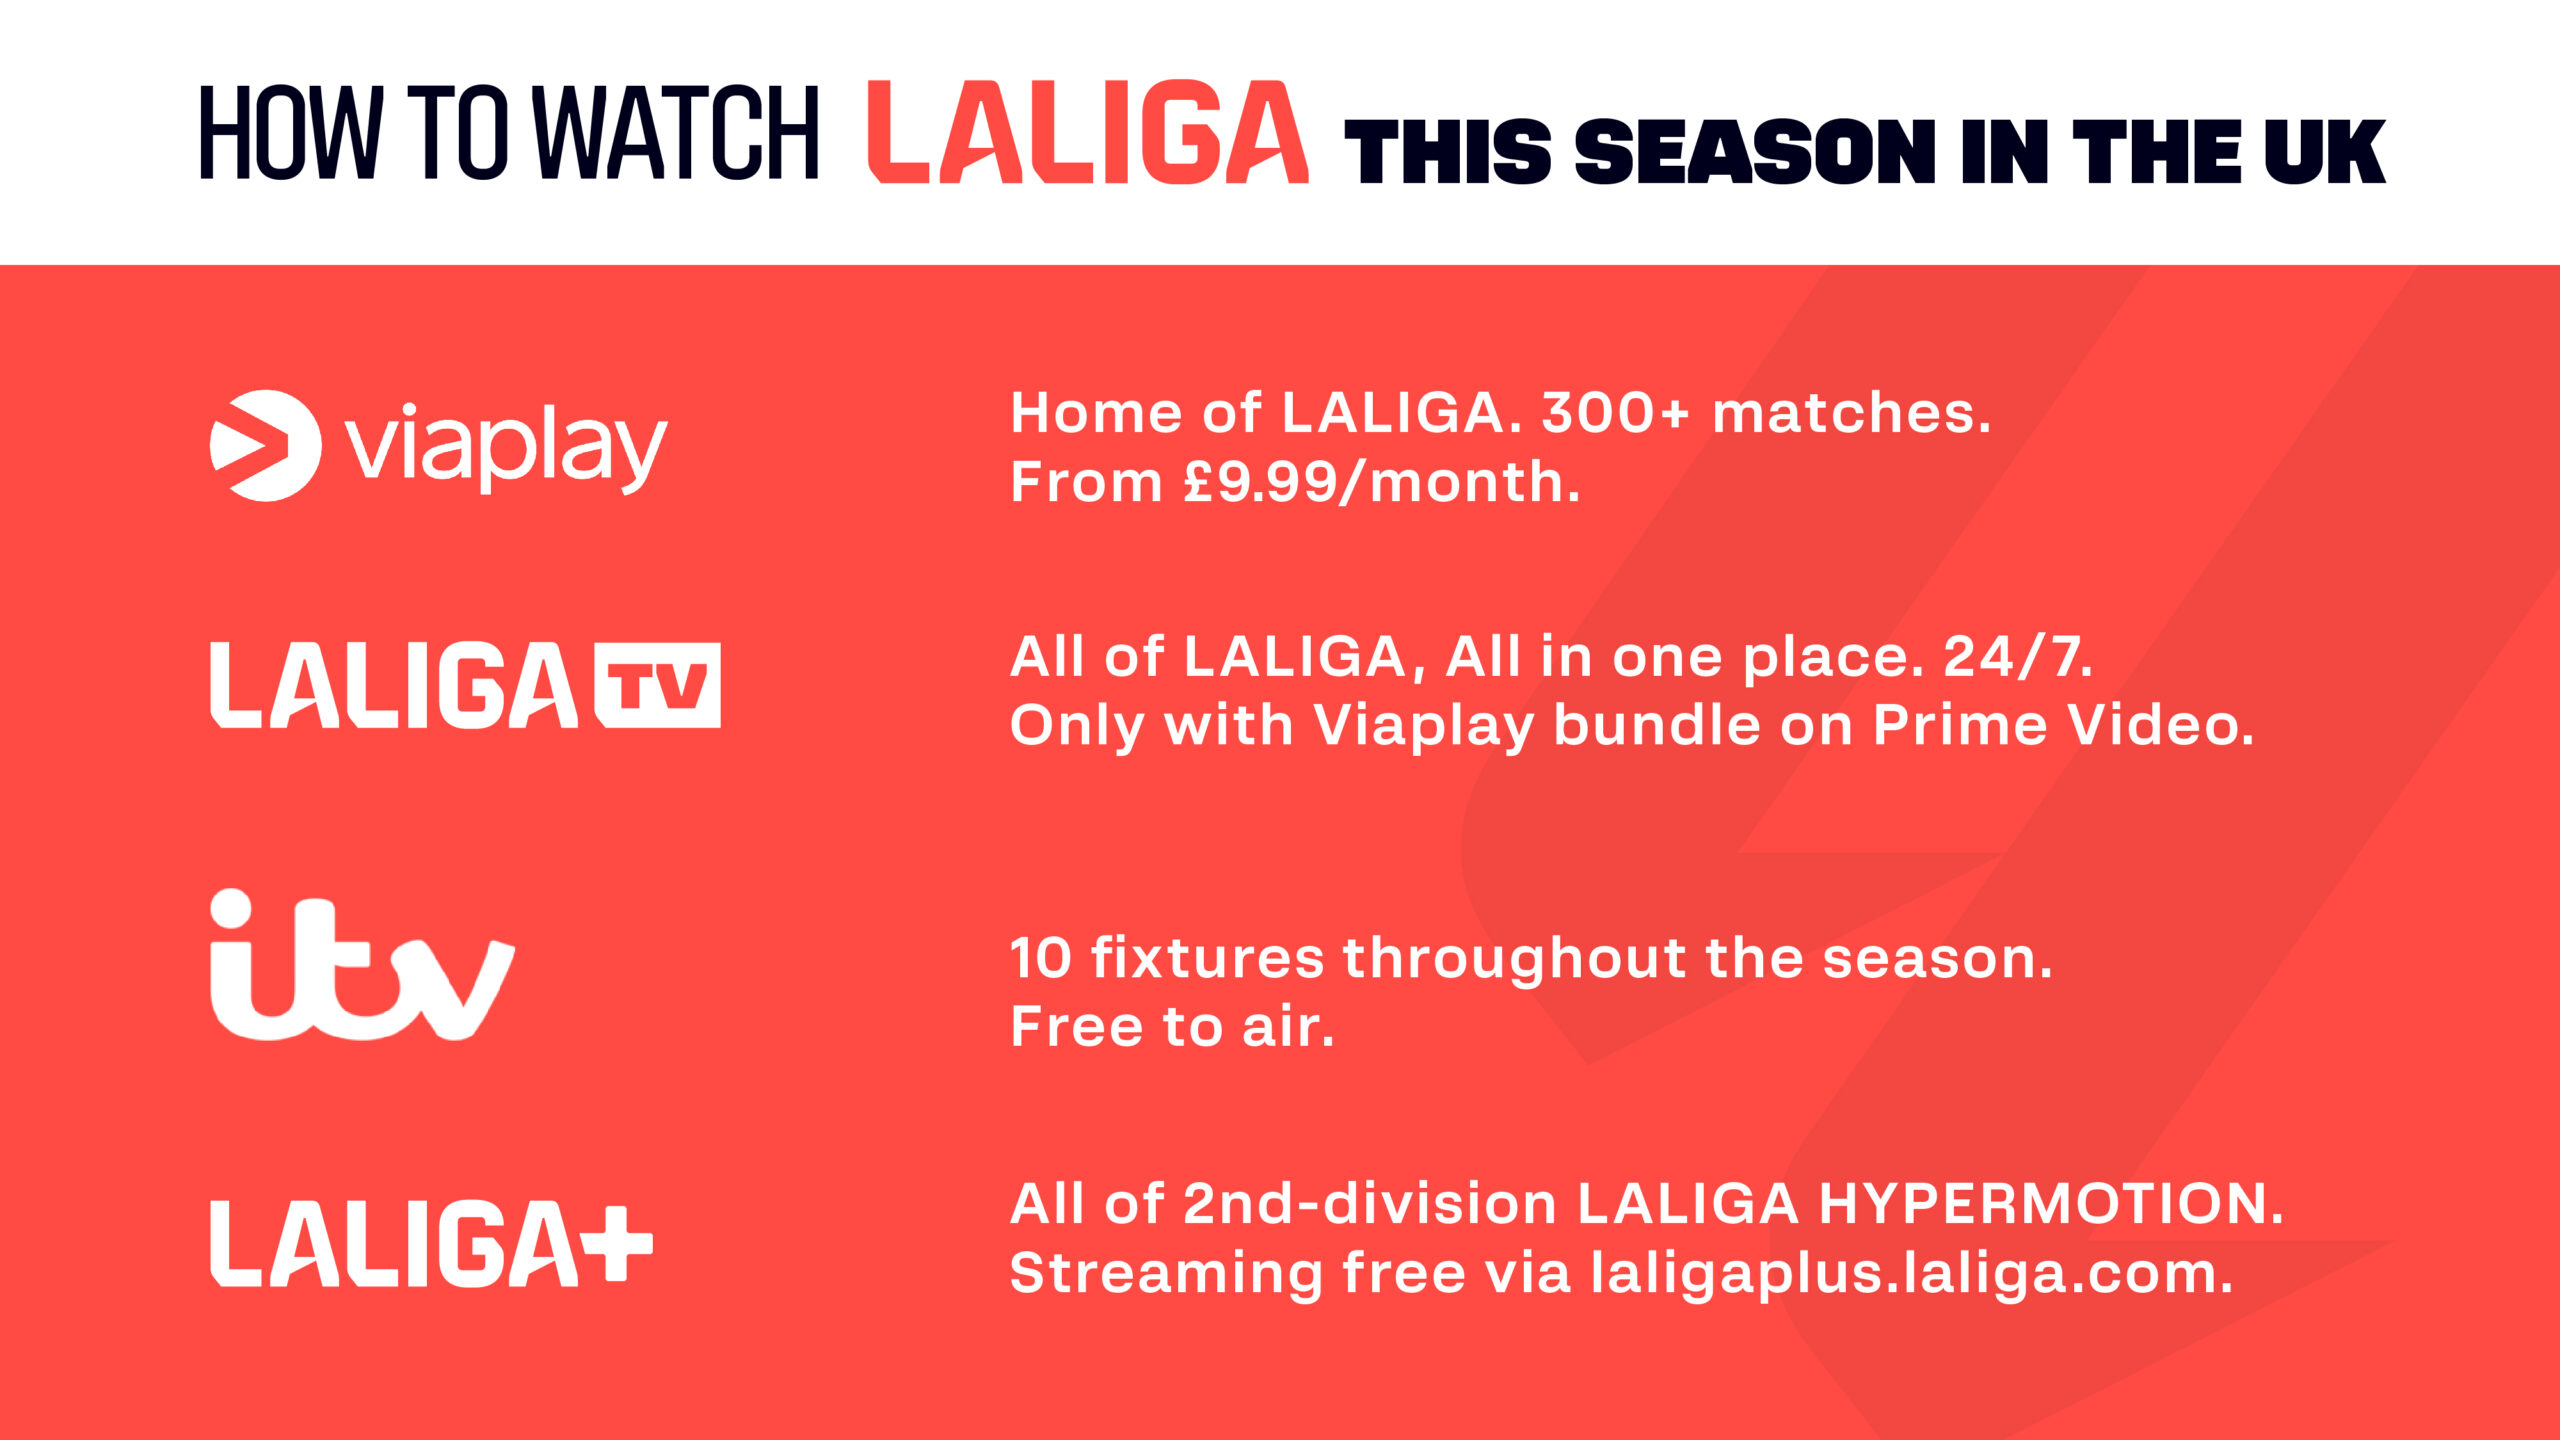 LALIGA IS BACK WITH MORE WAYS FOR UK FANS TO ENJOY THE BEST OF SPANISH FÚTBOL